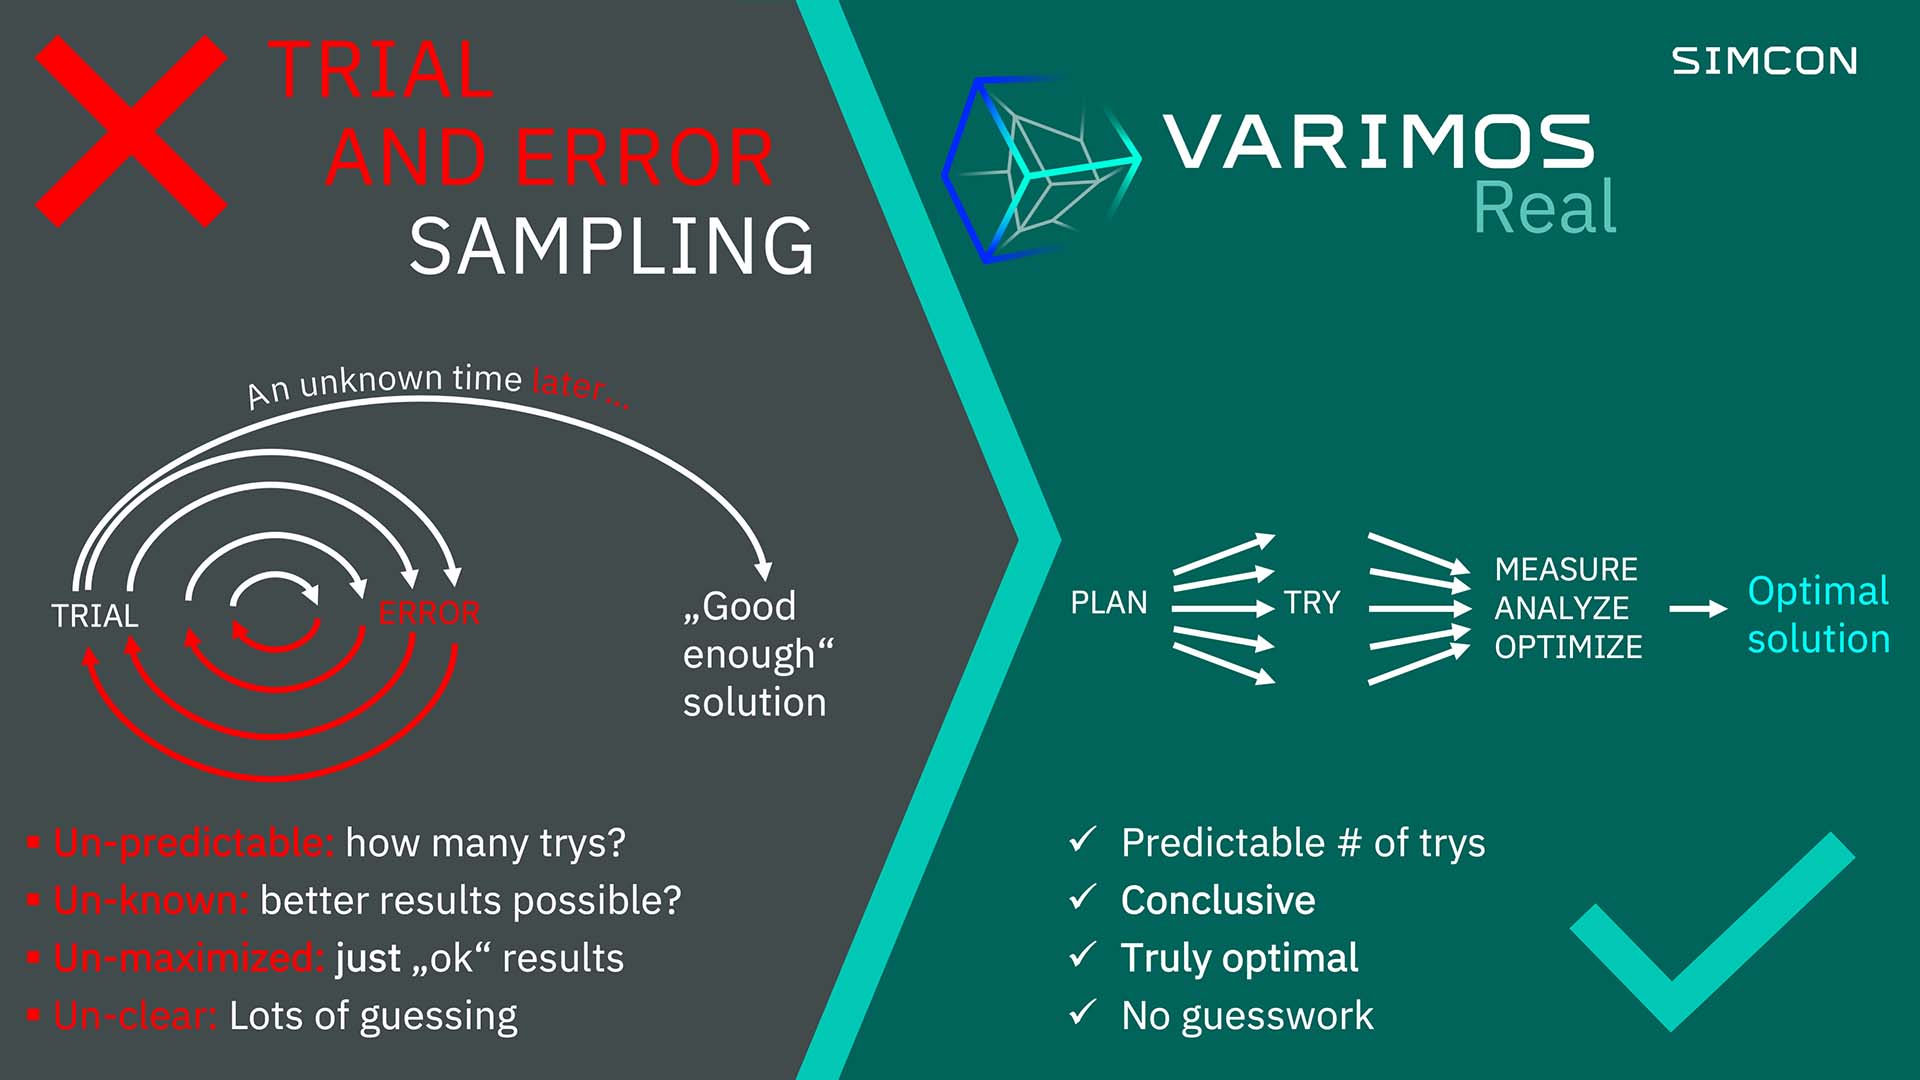 Trial and error sampling is an old-fashioned way of working. VARIMOS Real is more efficient and gets you better results, conclusively!